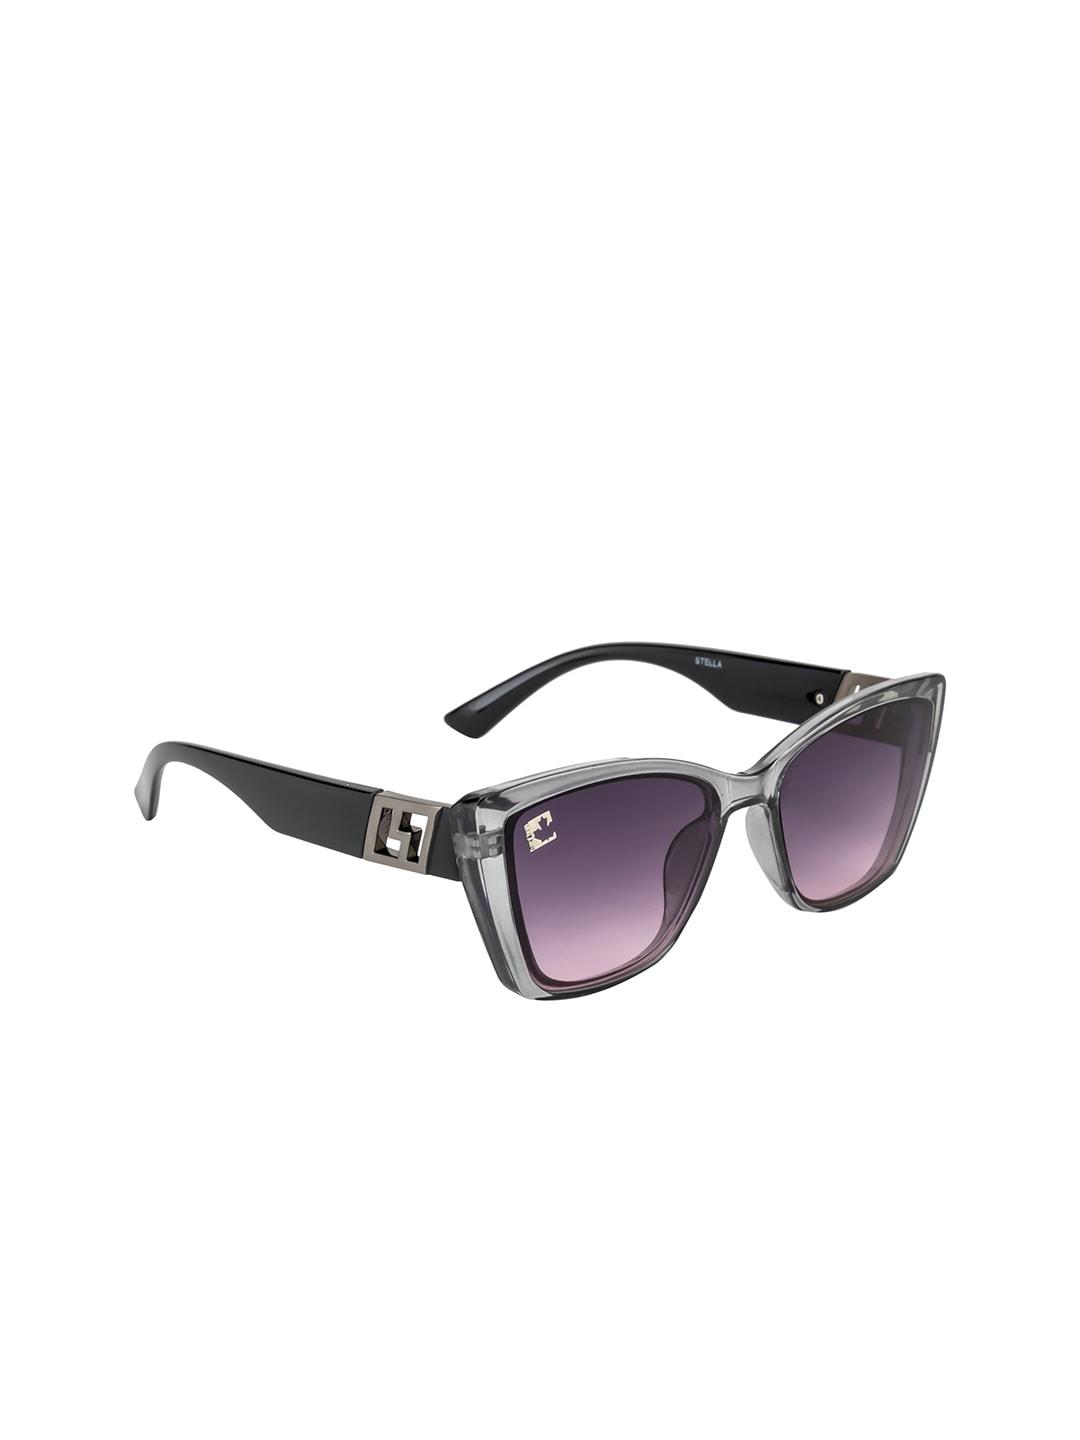 clark n palmer women cateye sunglasses with uv protected lens